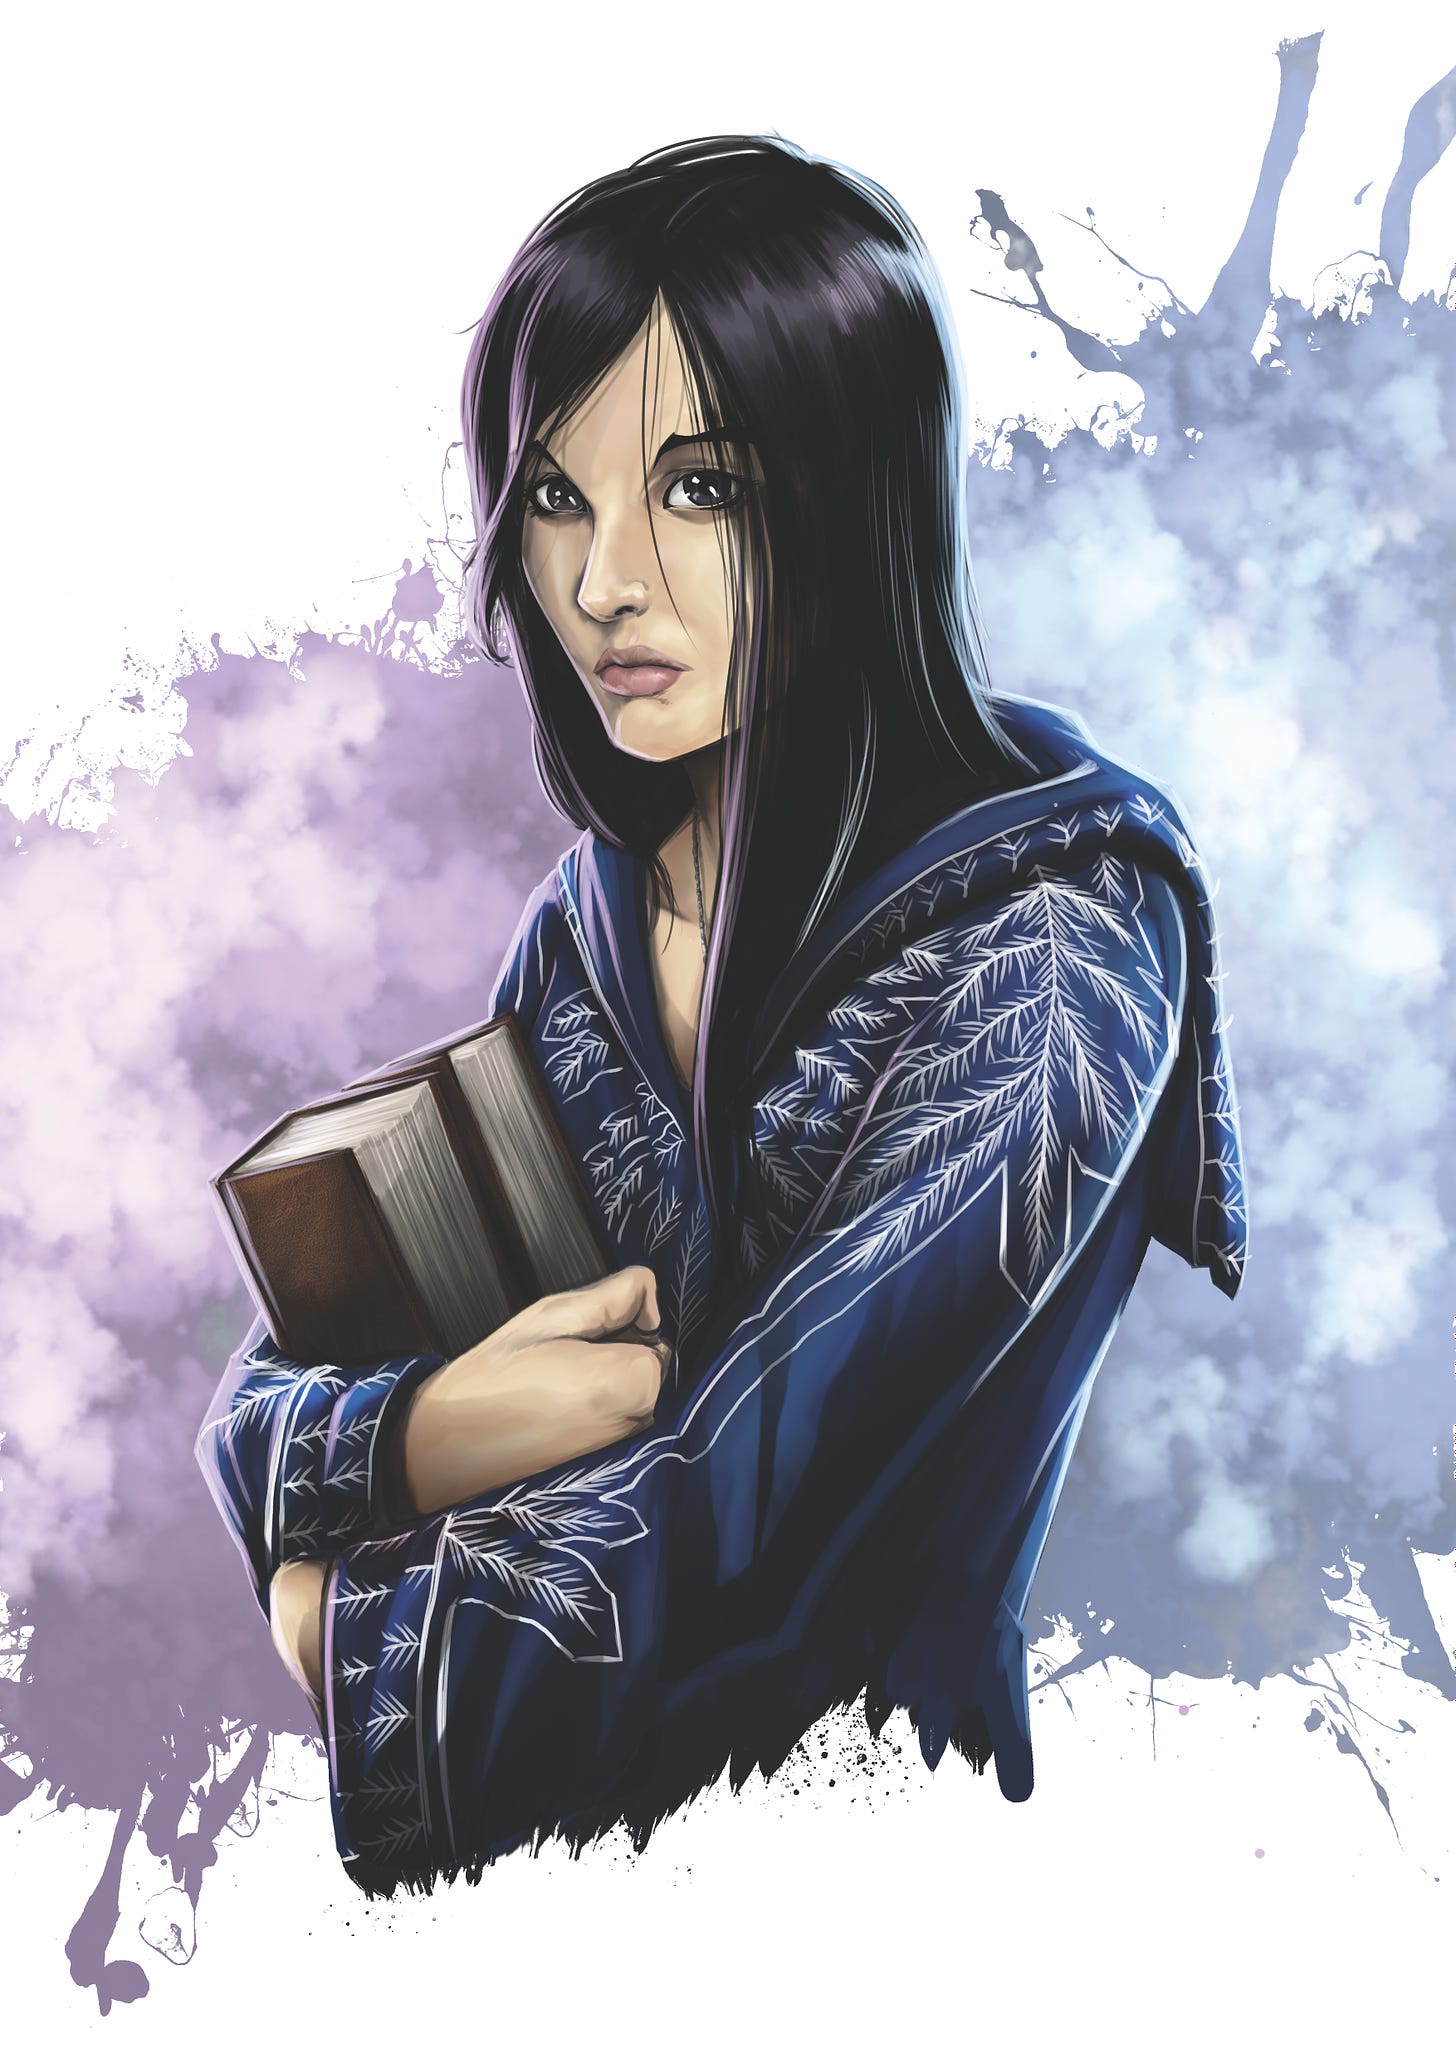 A picture of a girl with wide black eyes and raven black hair. Her long hair is falling in front of her face and her expression is worried. She's wearing blue mage robes edged in white, in a design almost like frost. She's clutching two hardback books to her chest.